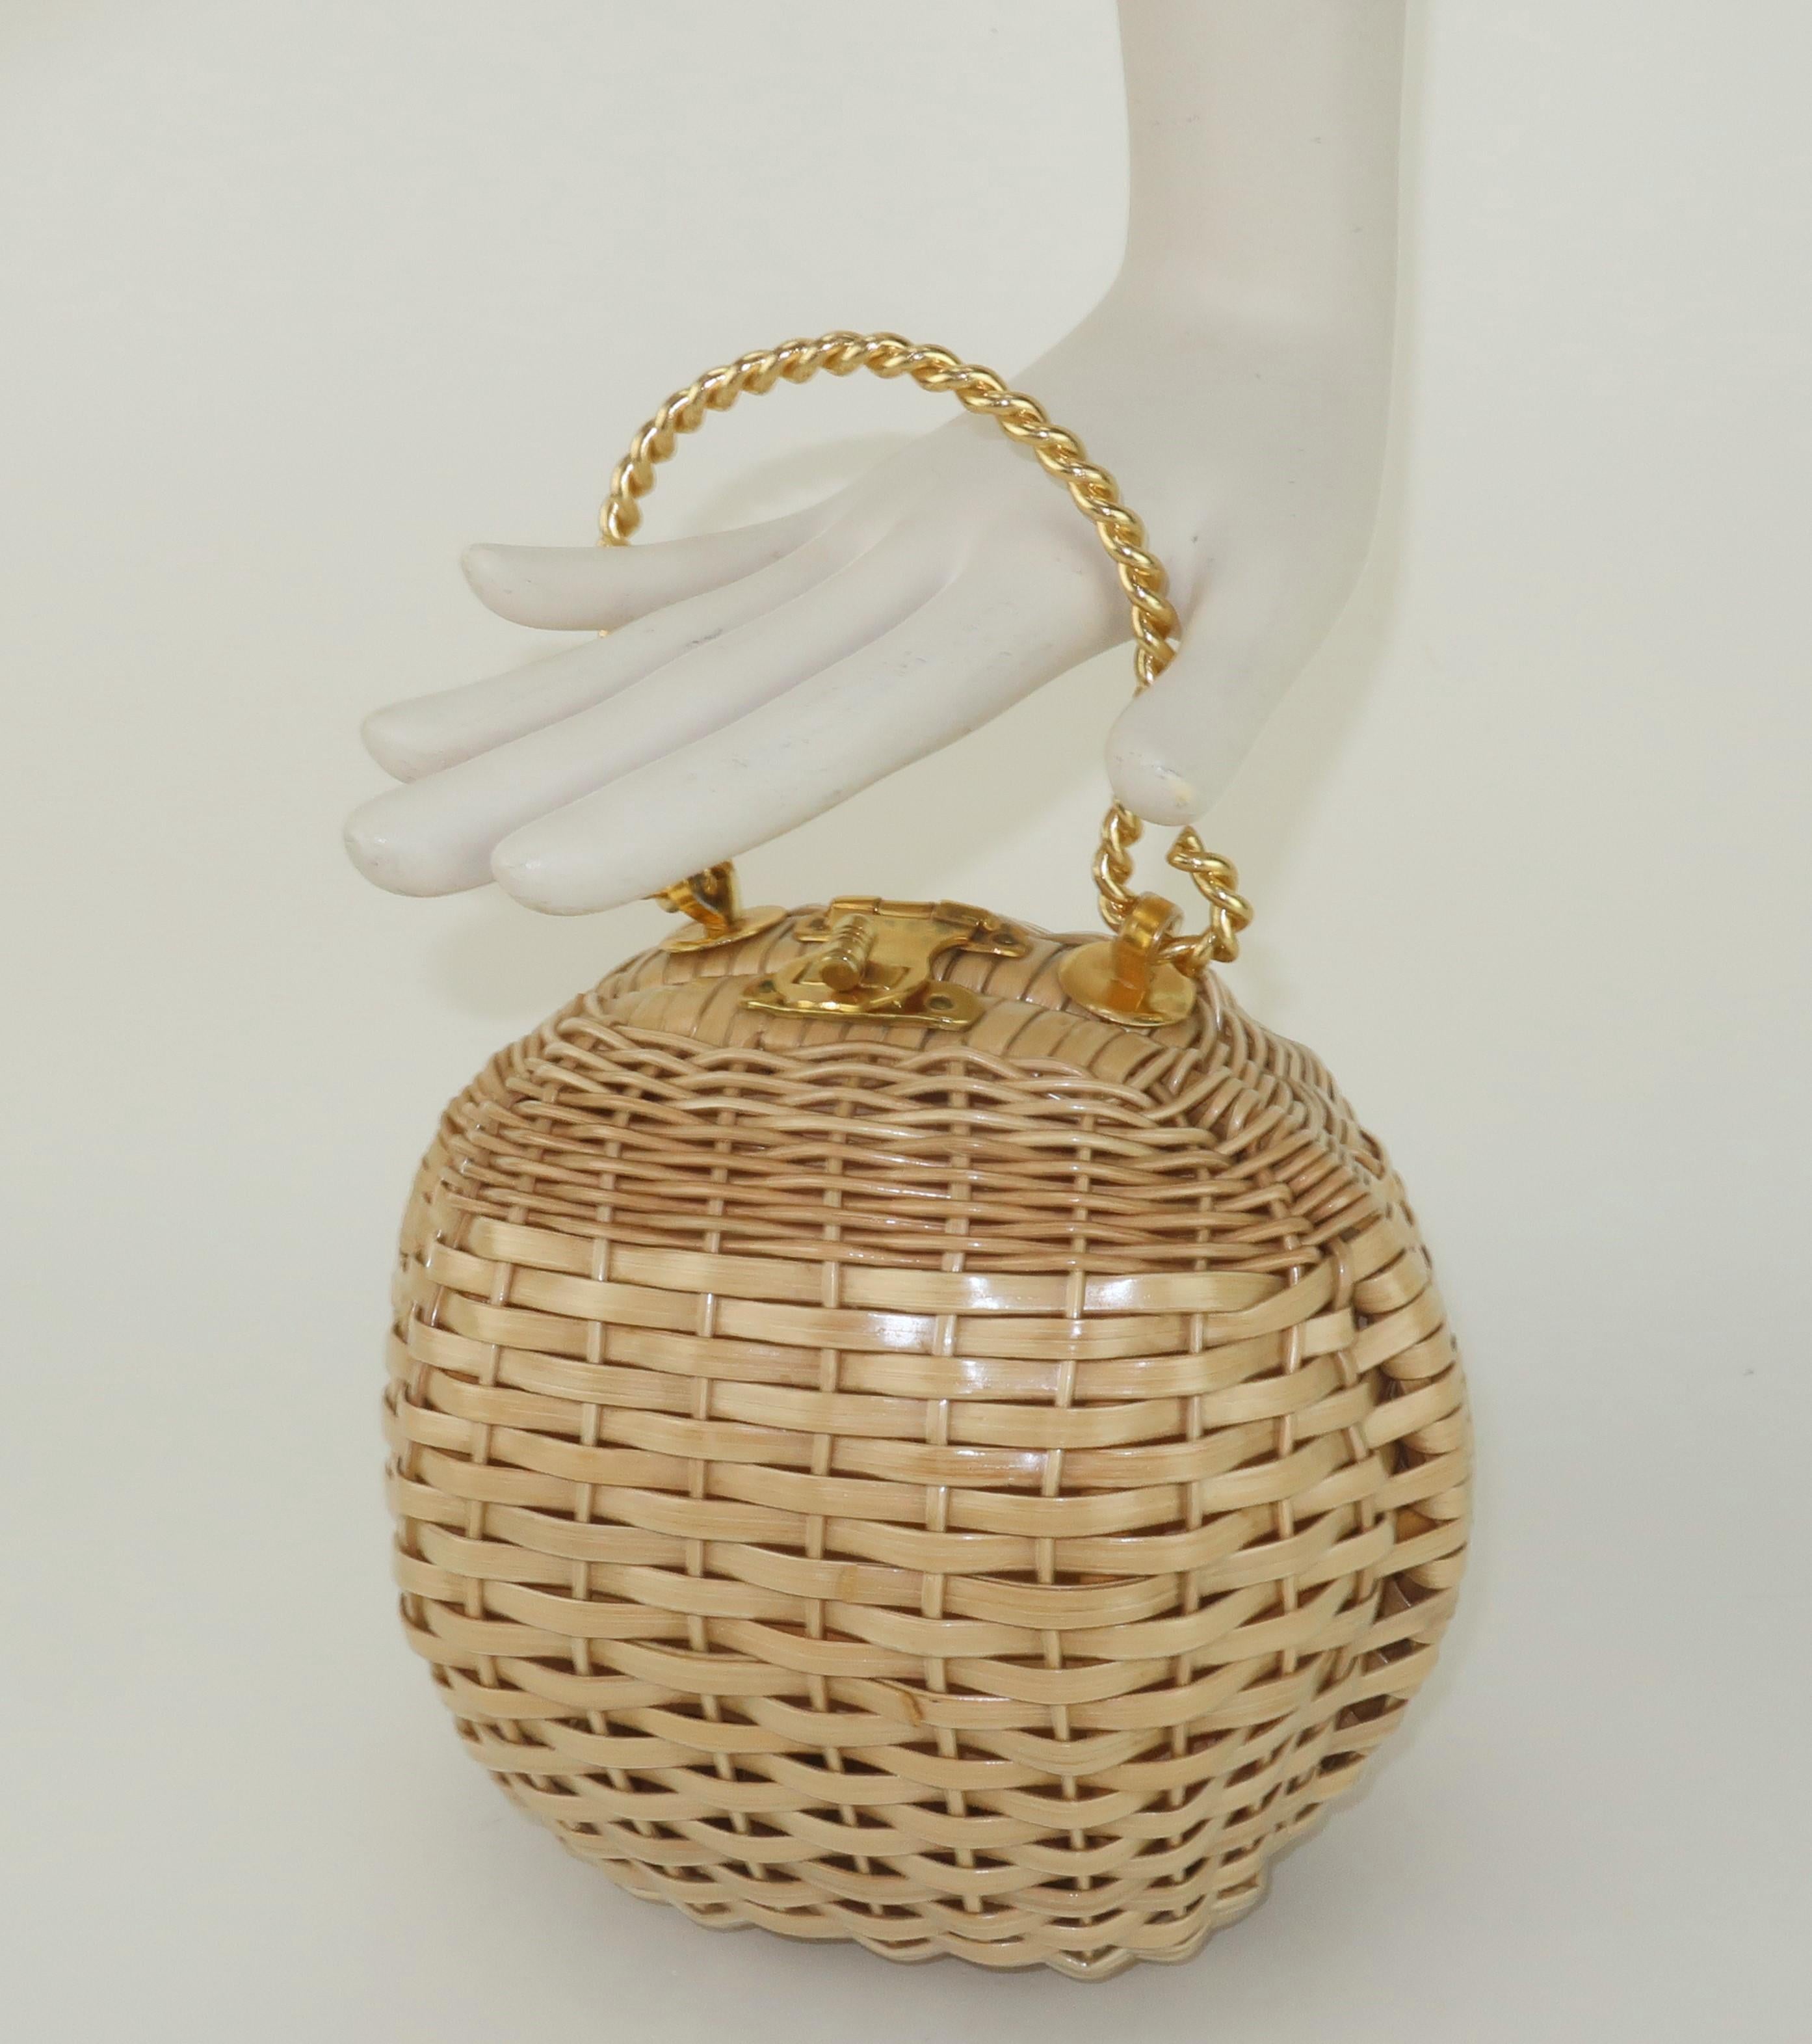 Wicker Ball Shaped Handbag With Gold Handle, 1960's For Sale 7